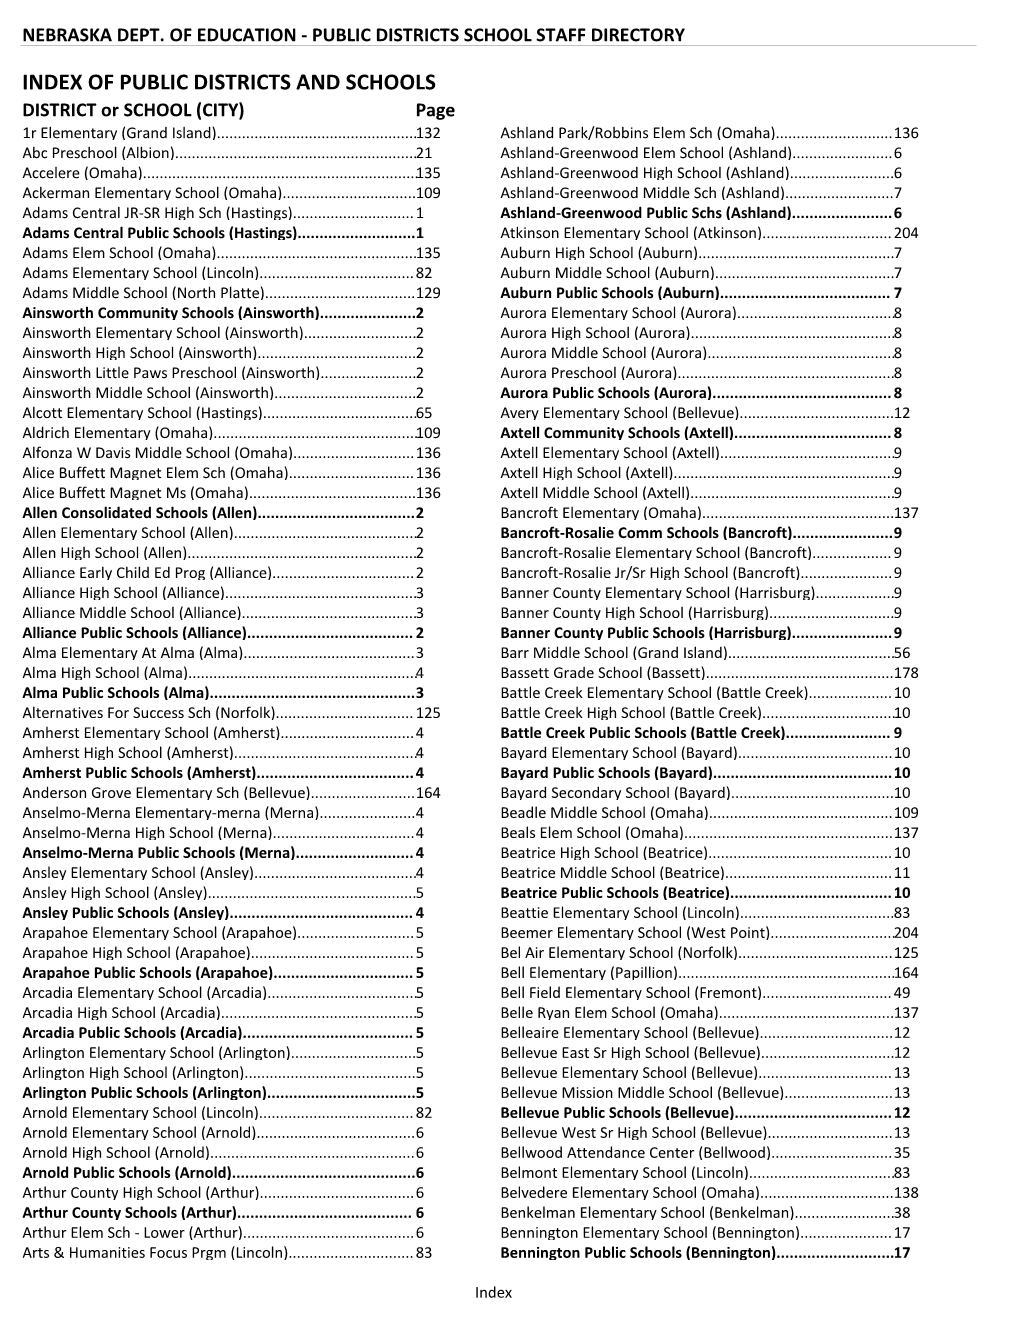 INDEX of PUBLIC DISTRICTS and SCHOOLS DISTRICT Or SCHOOL (CITY) Page 1R Elementary (Grand Island)